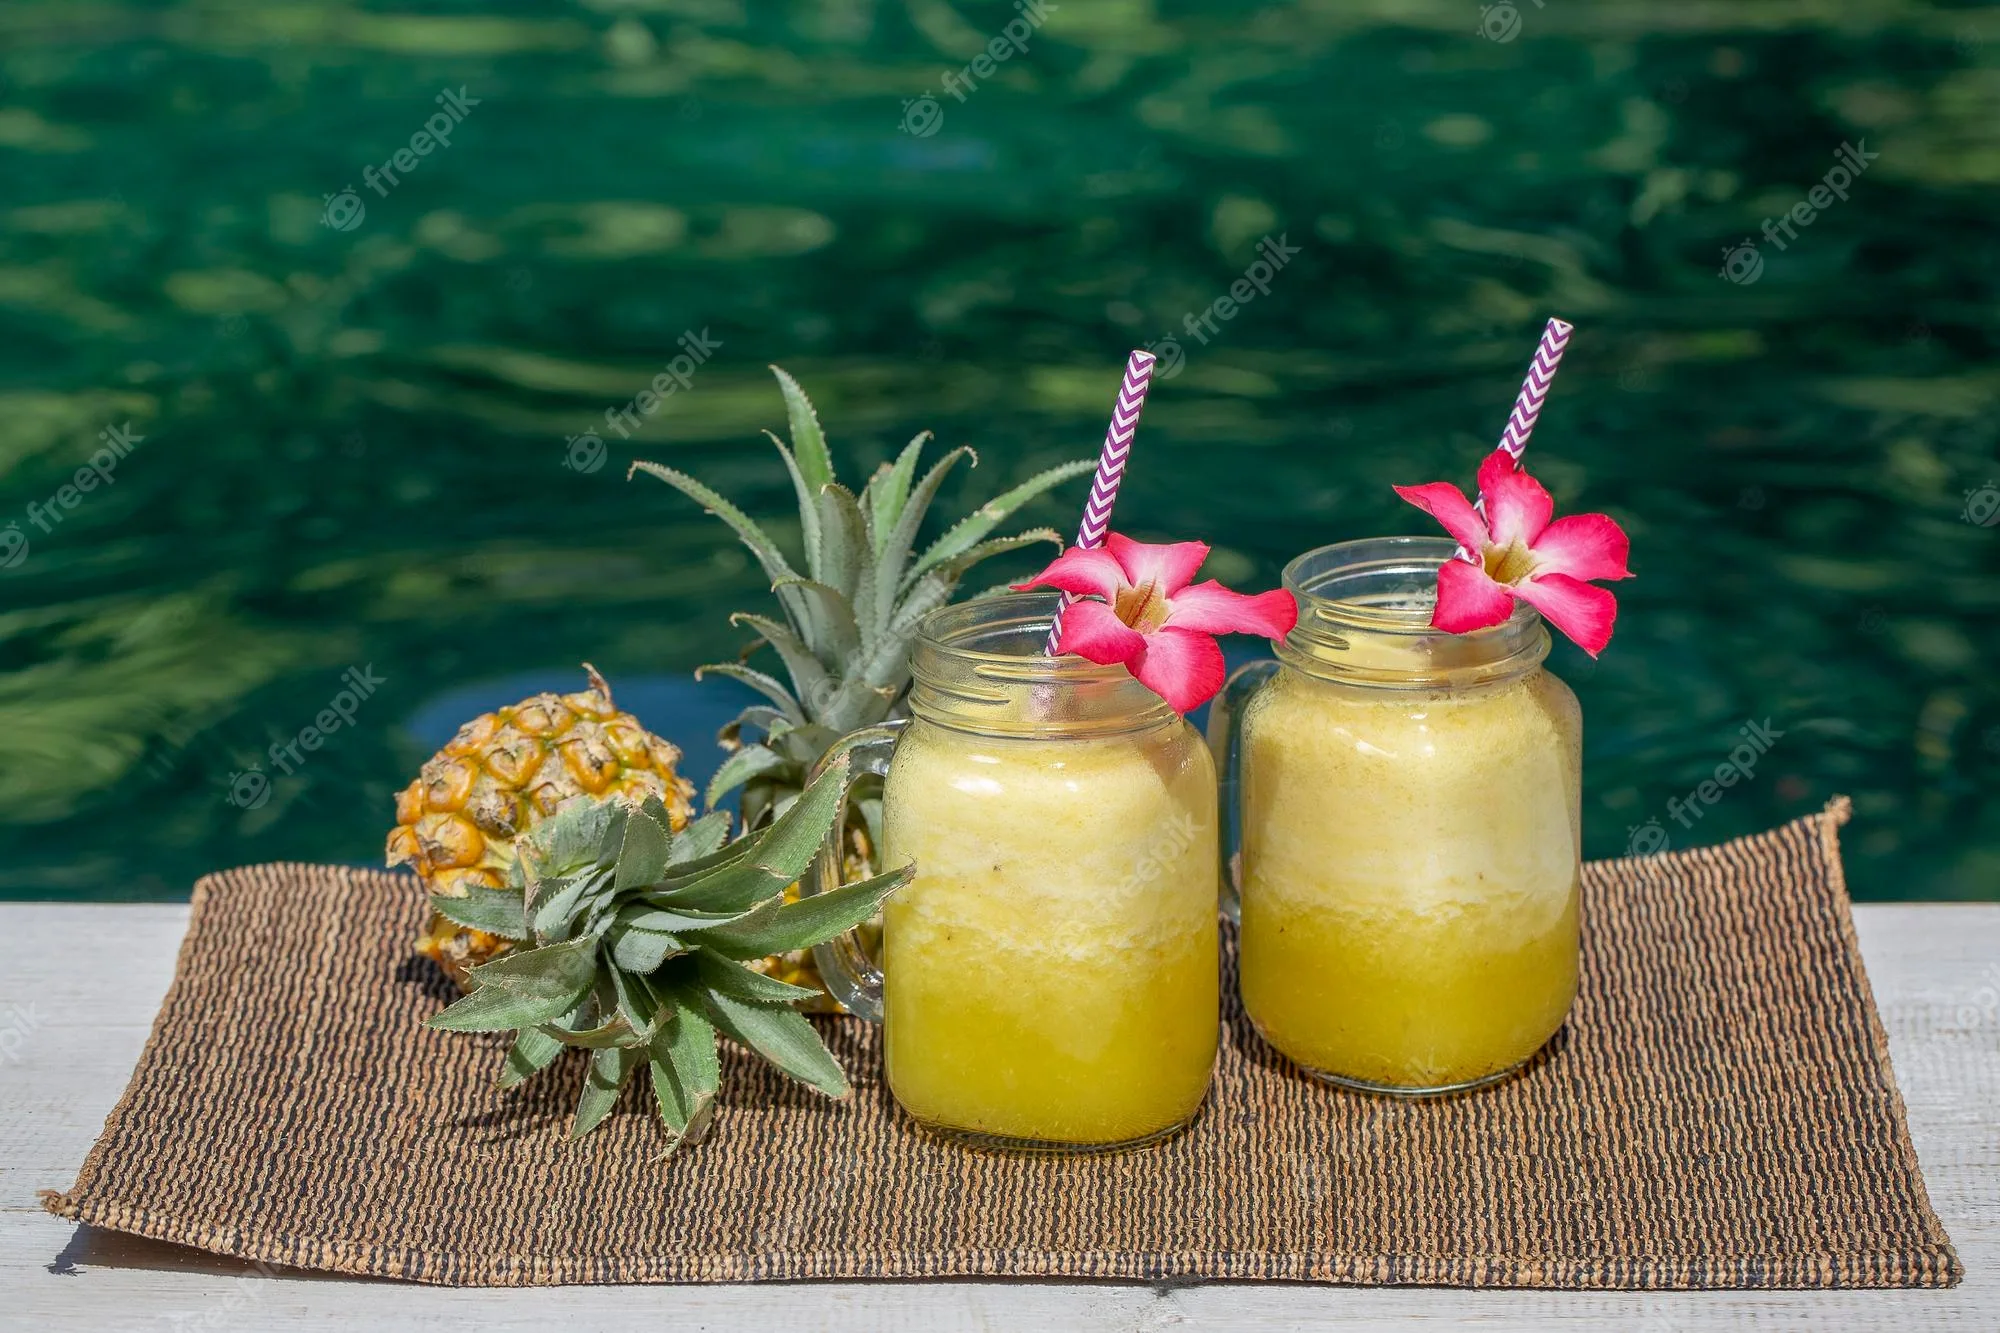 Deliciously Refreshing: How to Make Pineapple Spears in Coconut Water